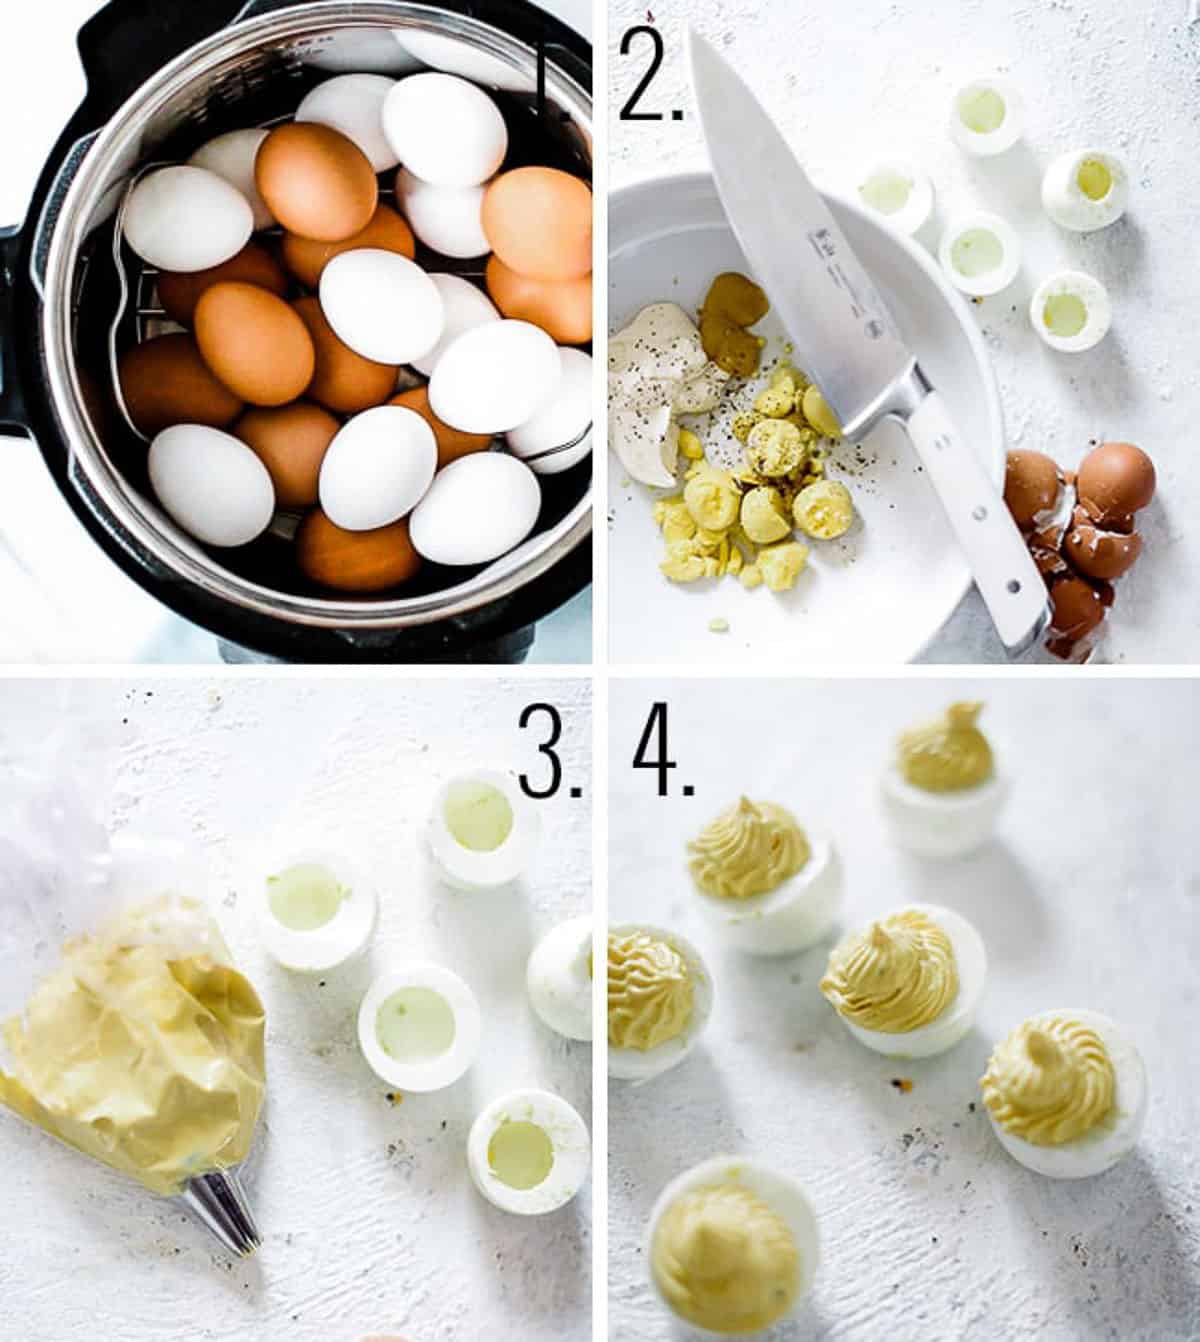 How to make deviled eggs.